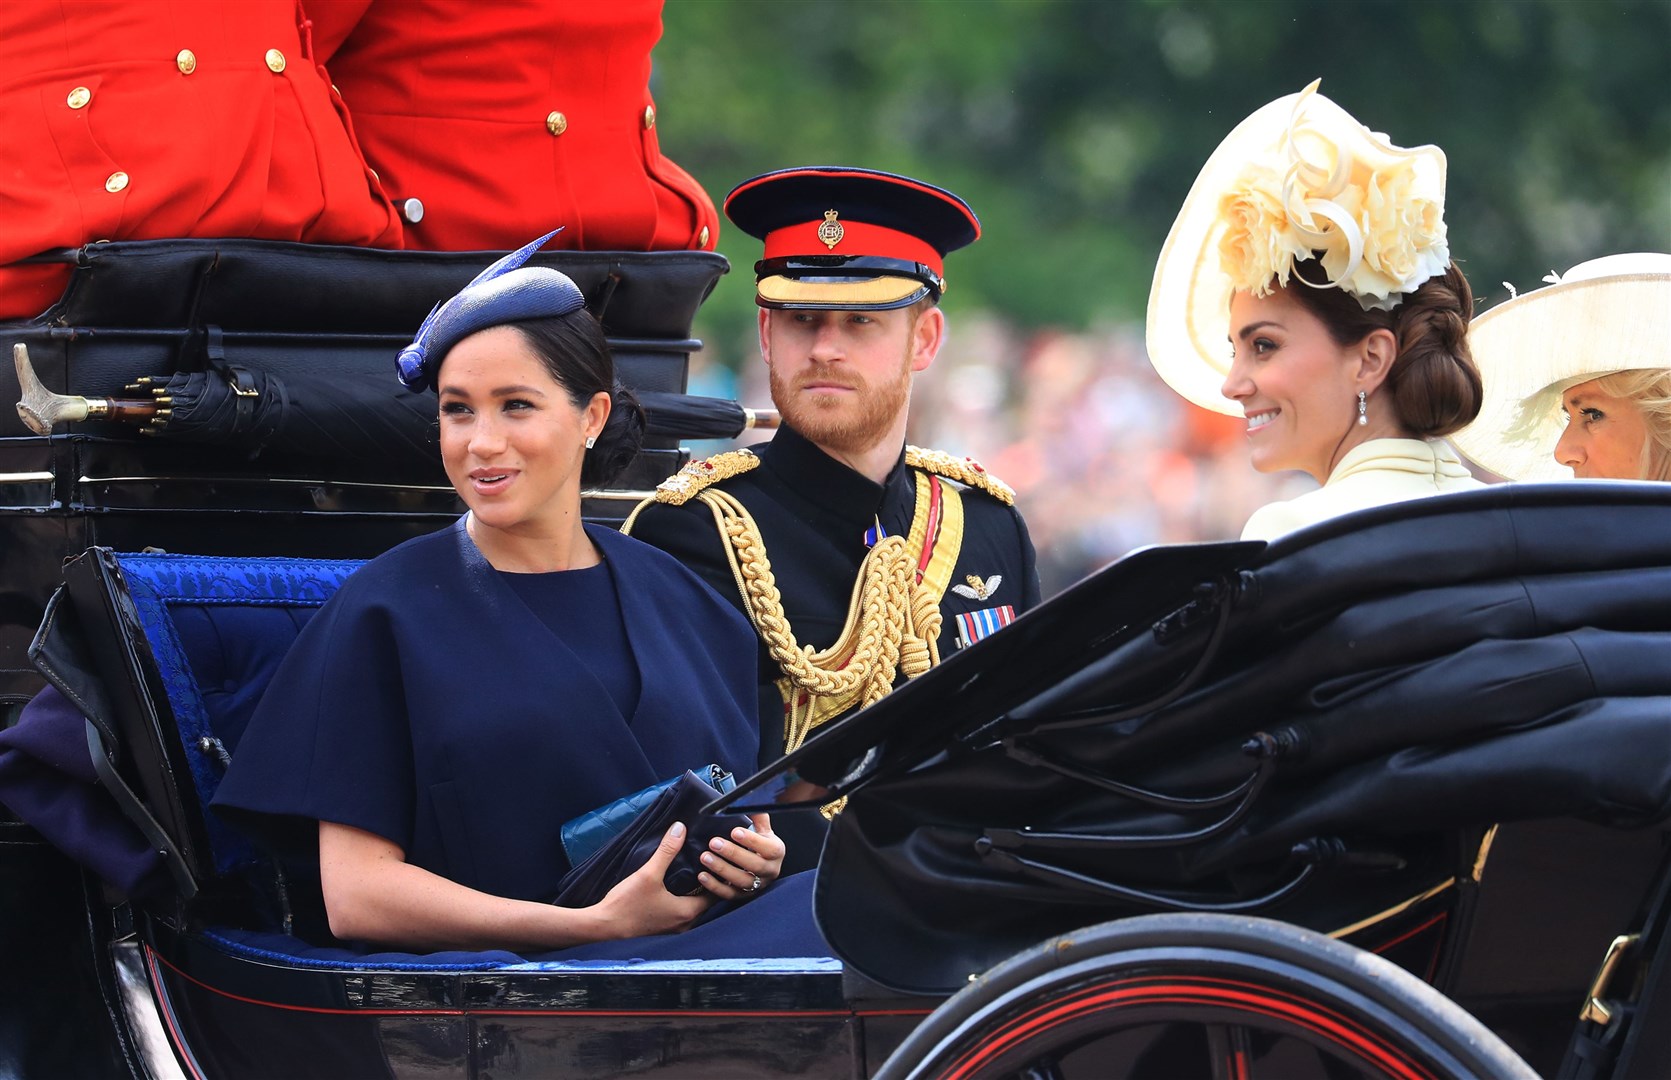 The Duke and Duchess of Sussex with the Duchess of Cambridge make their way along The Mall to Horse Guards Parade ahead of the Trooping the Colour ceremony in 2019 (PA)